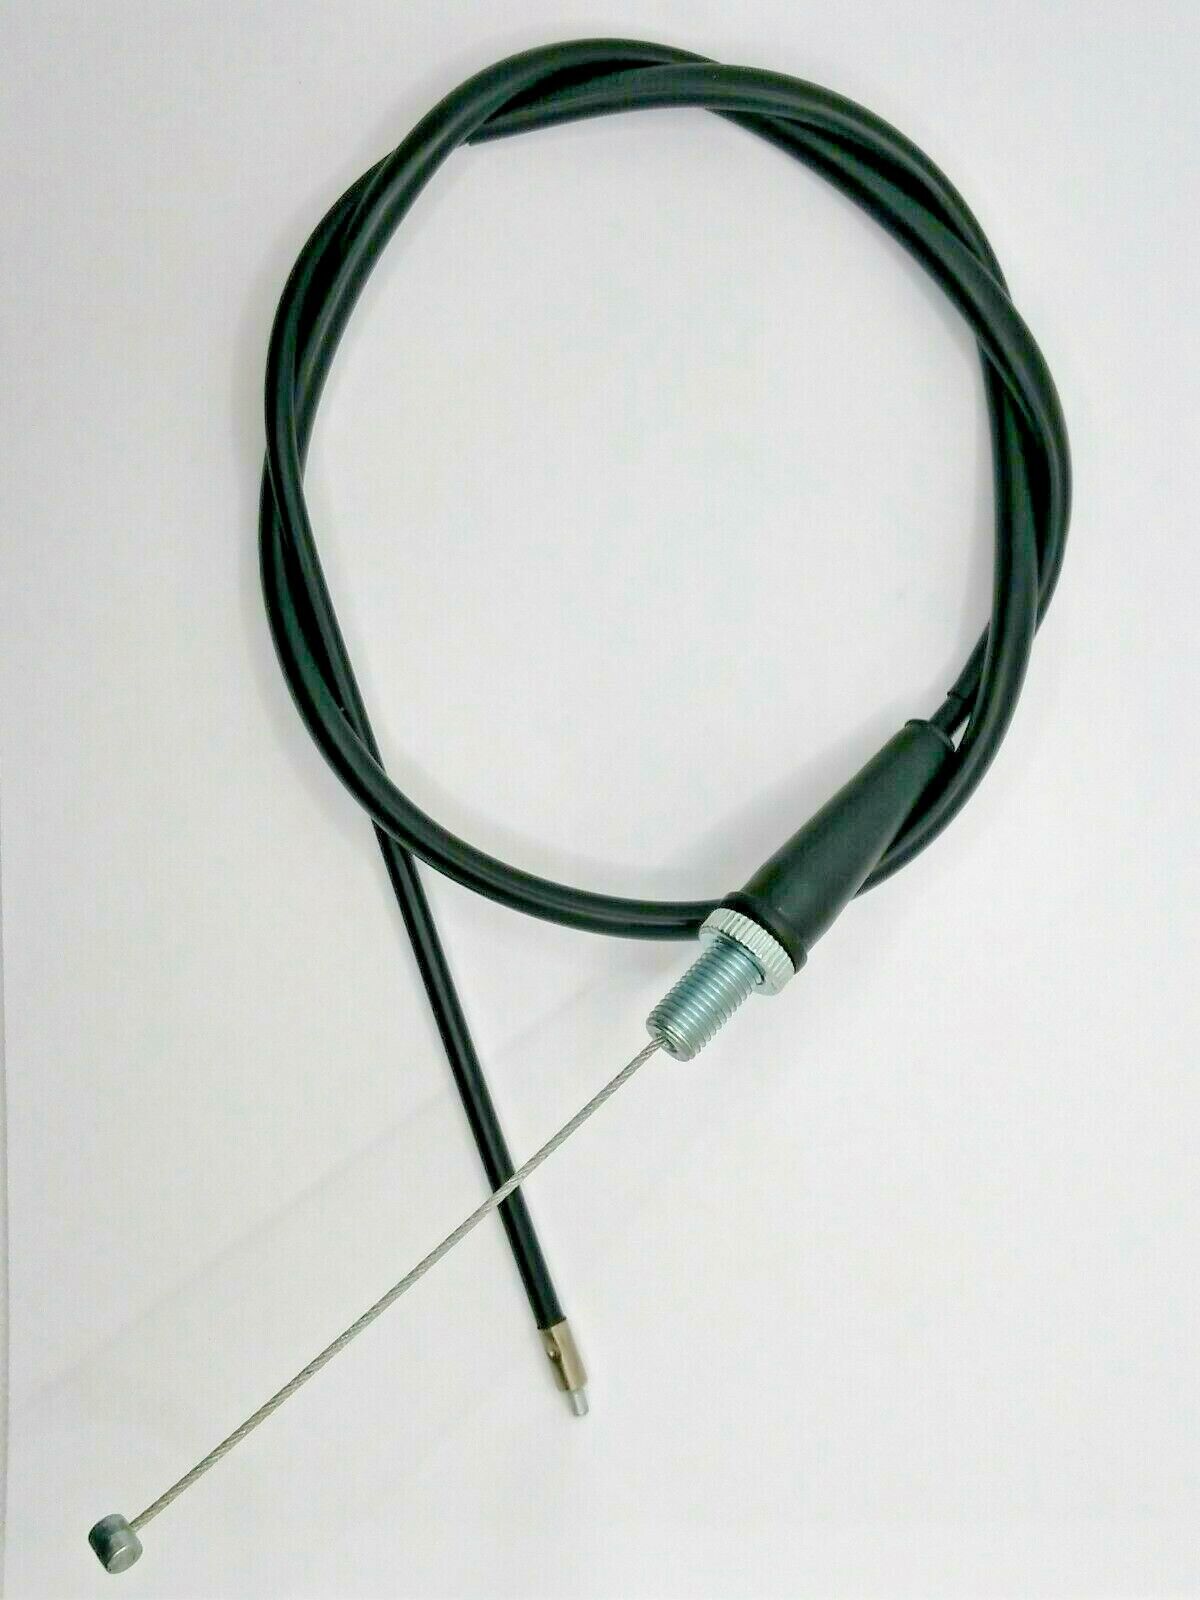 RPS Hawk 250 Throttle Cable (#10 in diagram)